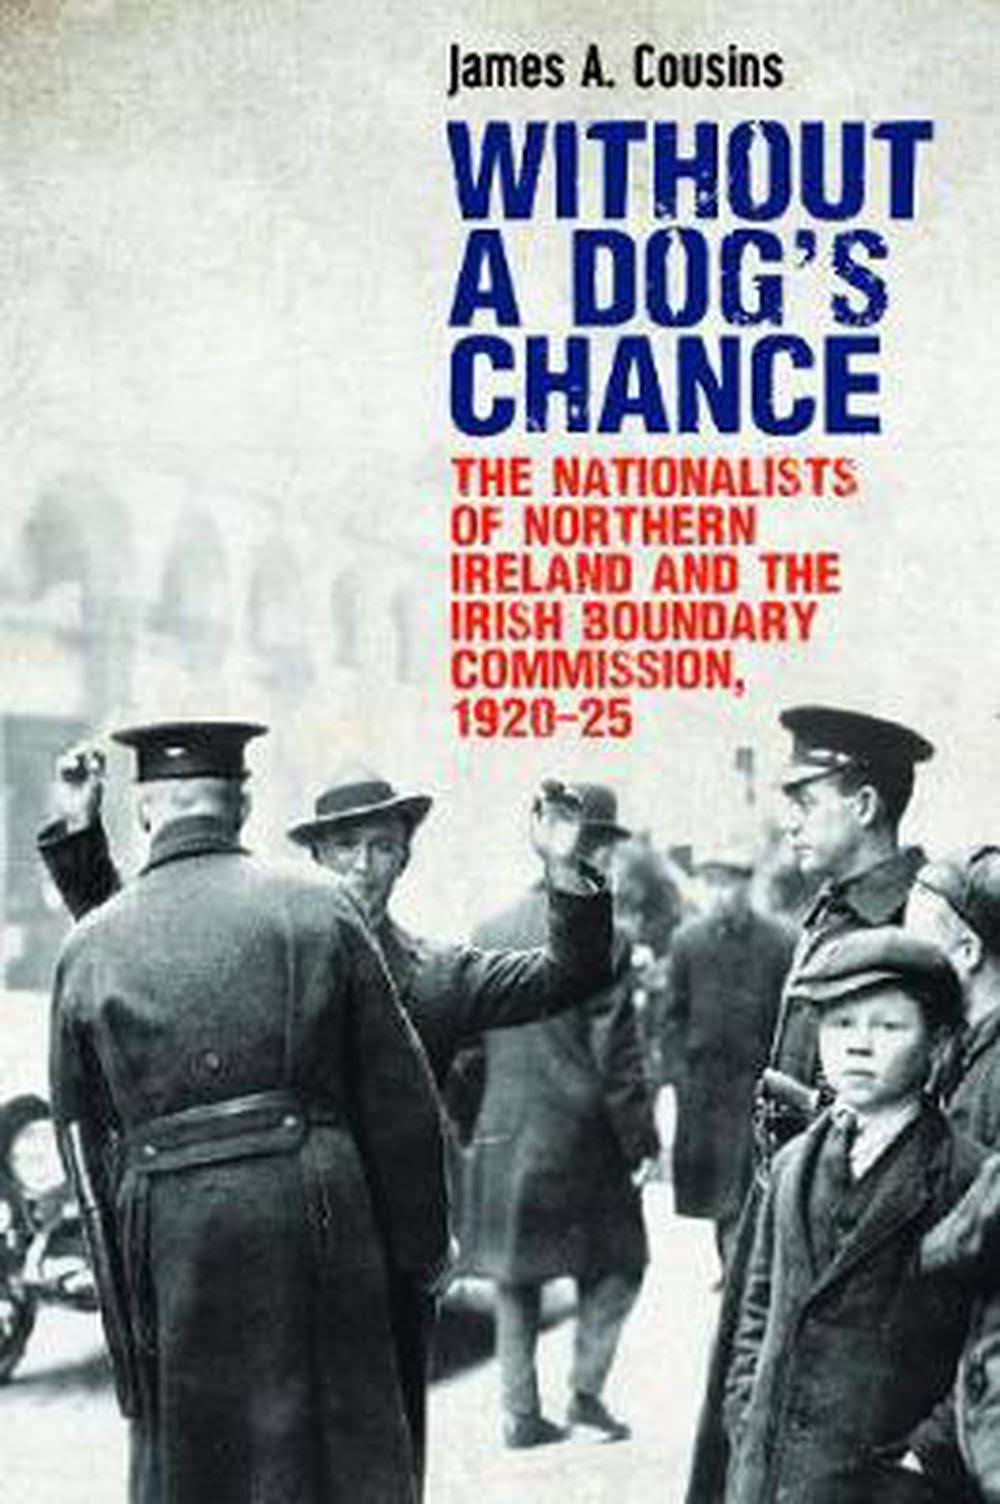 Without A Dog's Chance by James Cousins